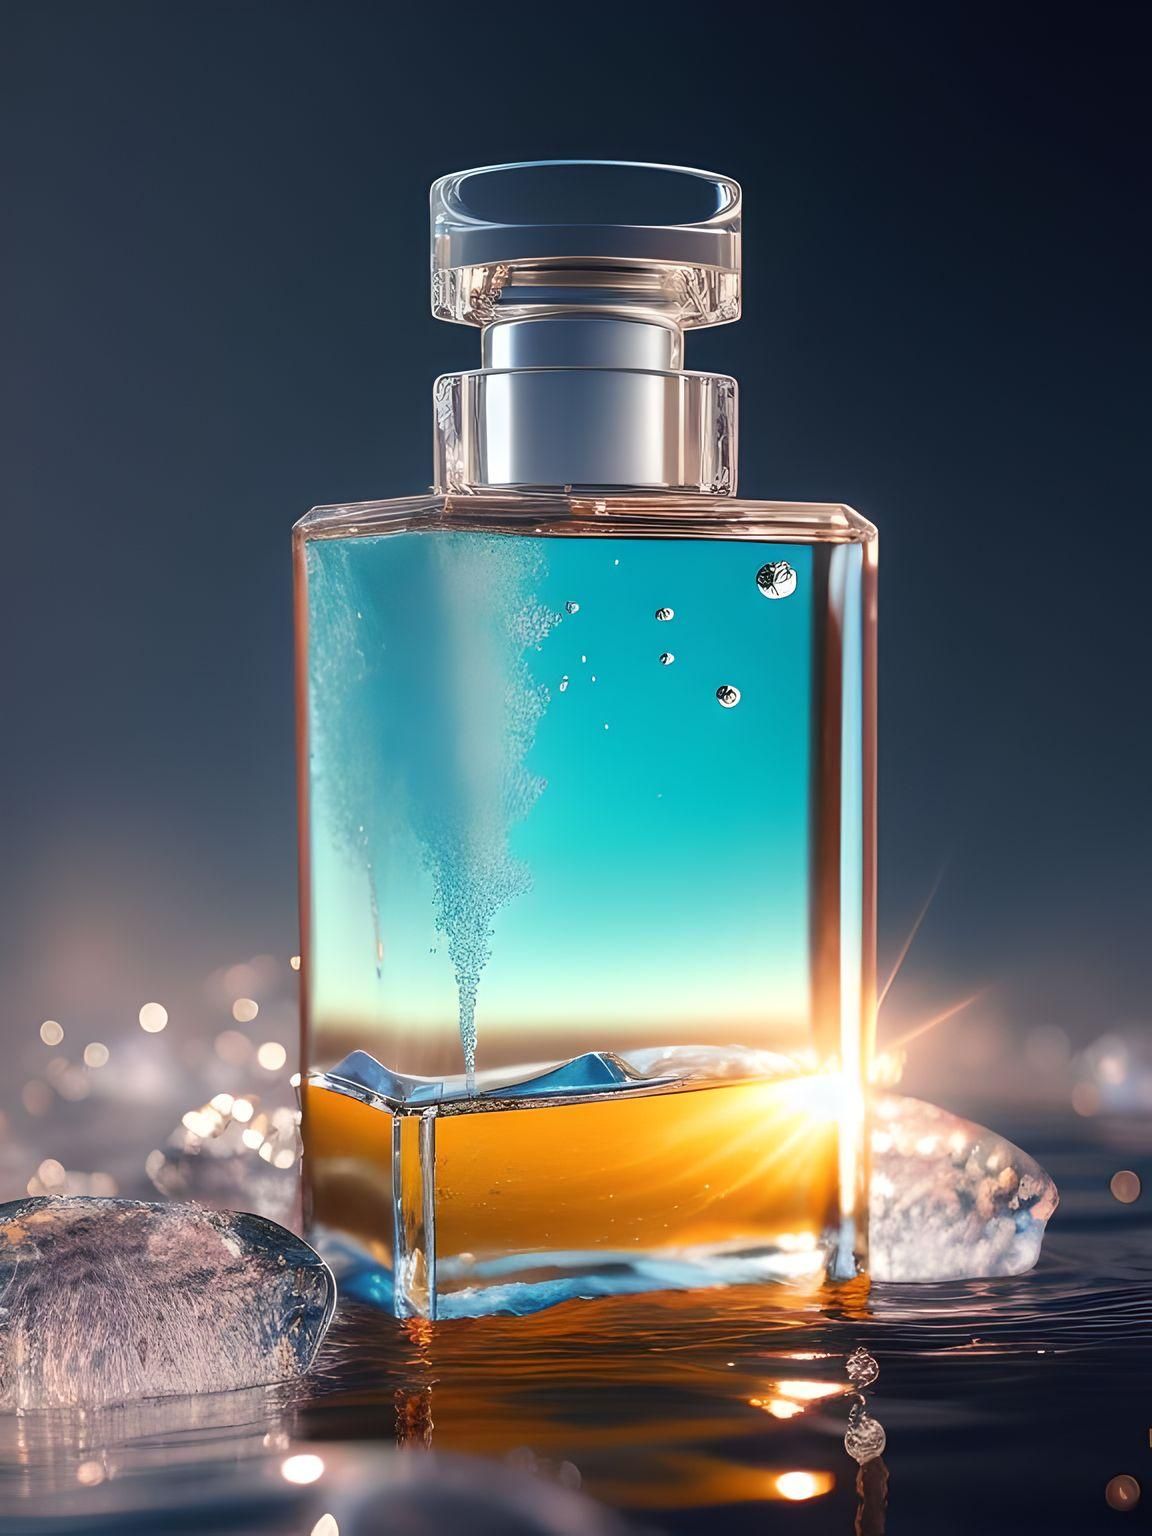 A delicate and noble glass perfume bottle was placed in the middle of the water,The sunlight asperses full, on the water flutters falls the petal, has the dew, the crystal clear feeling, the warm color tone,Headshot, Center the composition,Hyper-realistic style, realistic, photography, high detail, high quality, high resolution, 8k